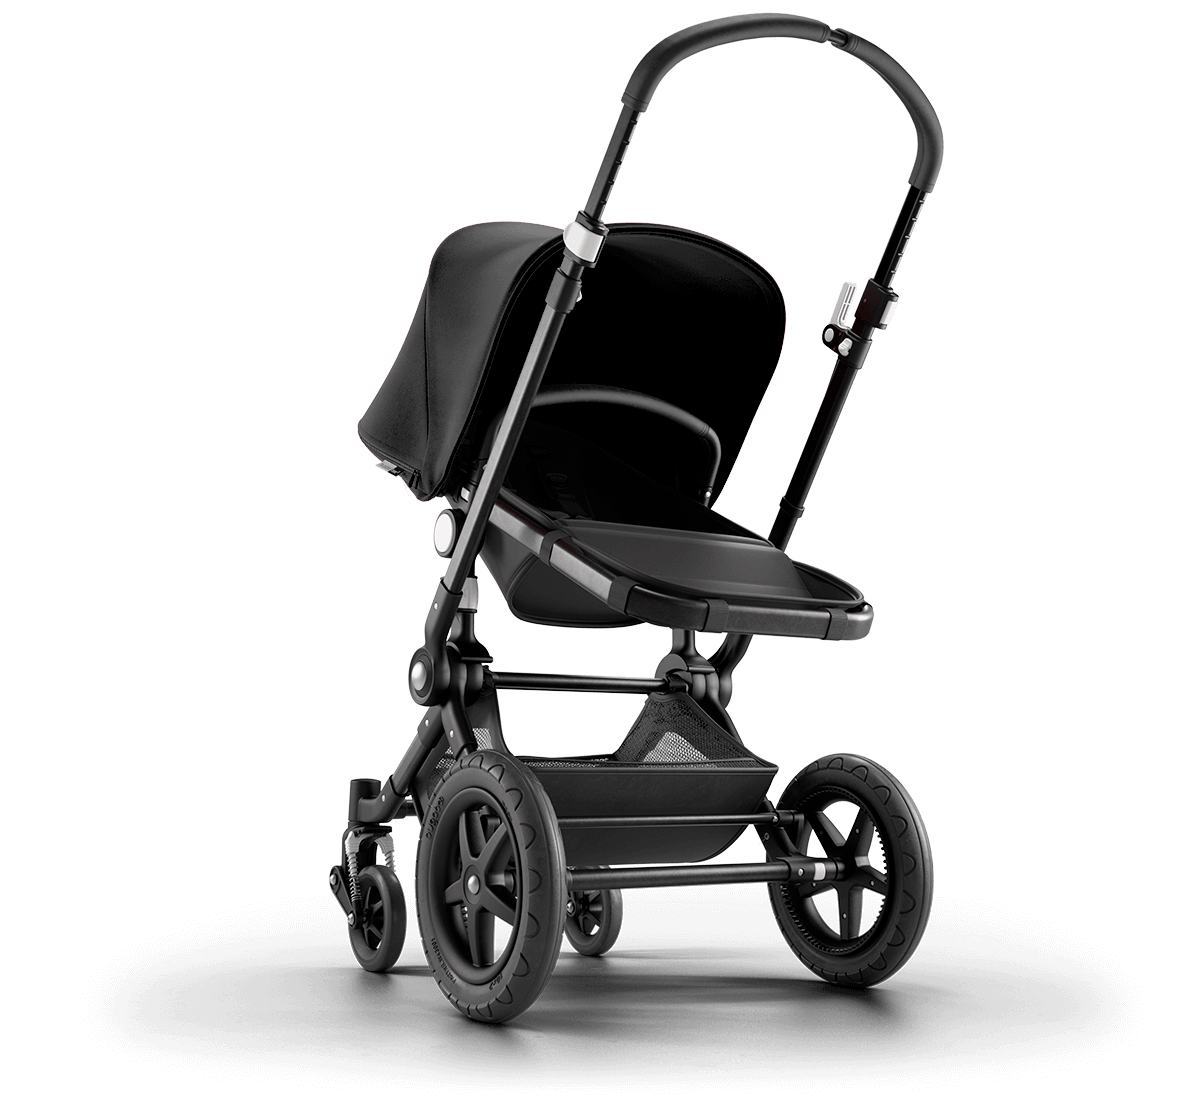 Bugaboo Cameleon 3 Frame Only In Sw11 Wandsworth For 15 00 For Sale Shpock